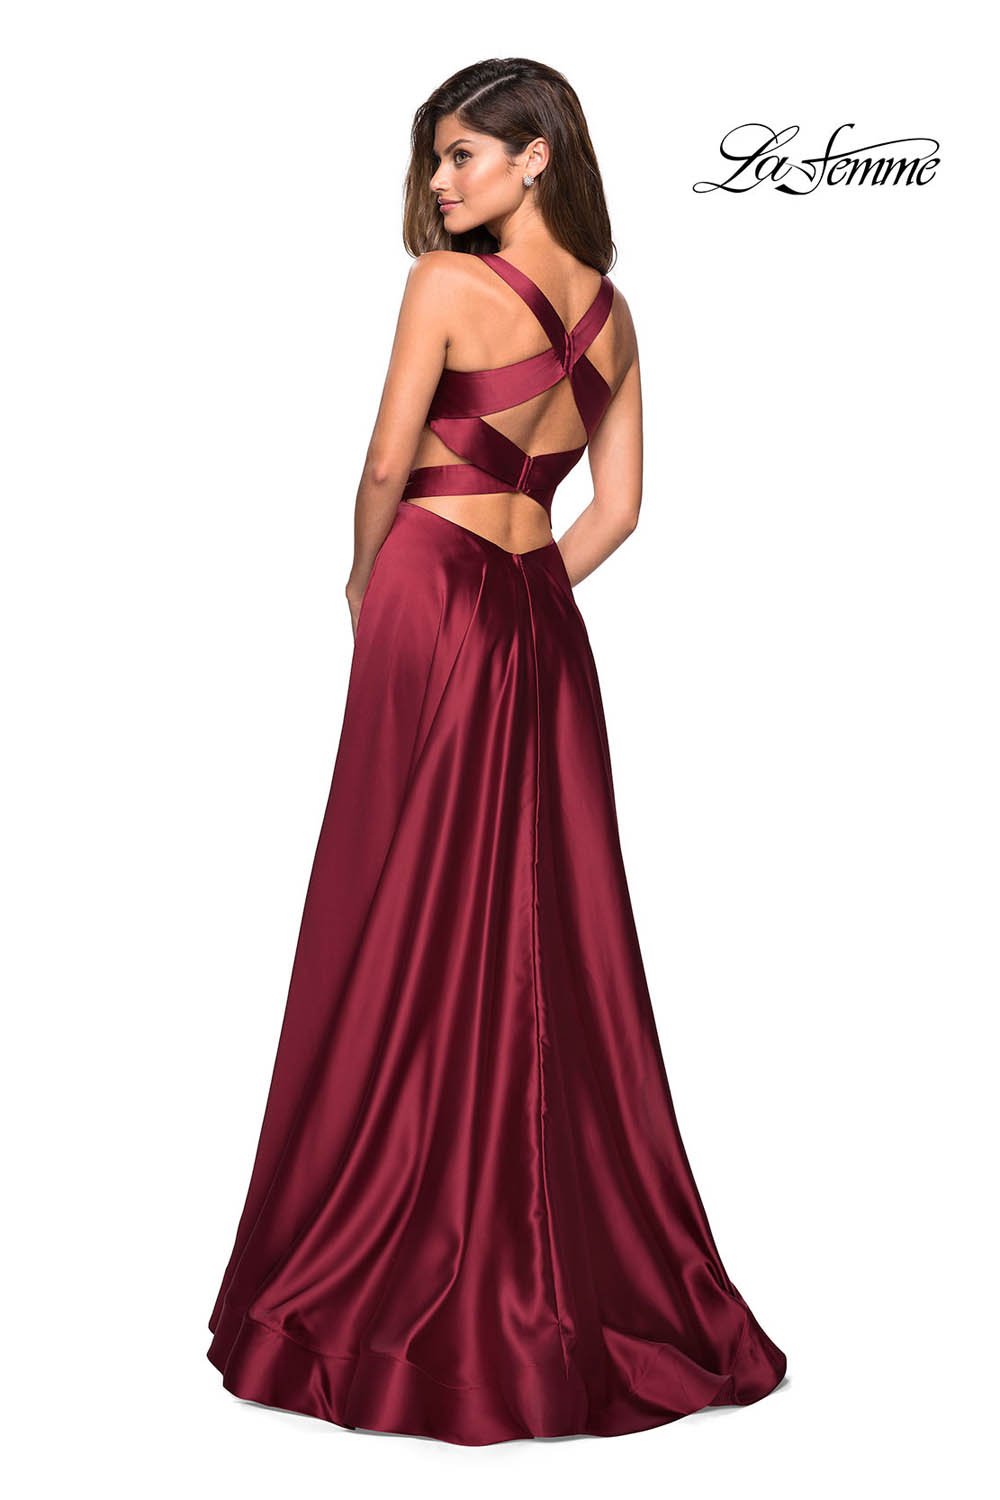 La Femme 27487 dress images in these colors: Deep Red, Navy.